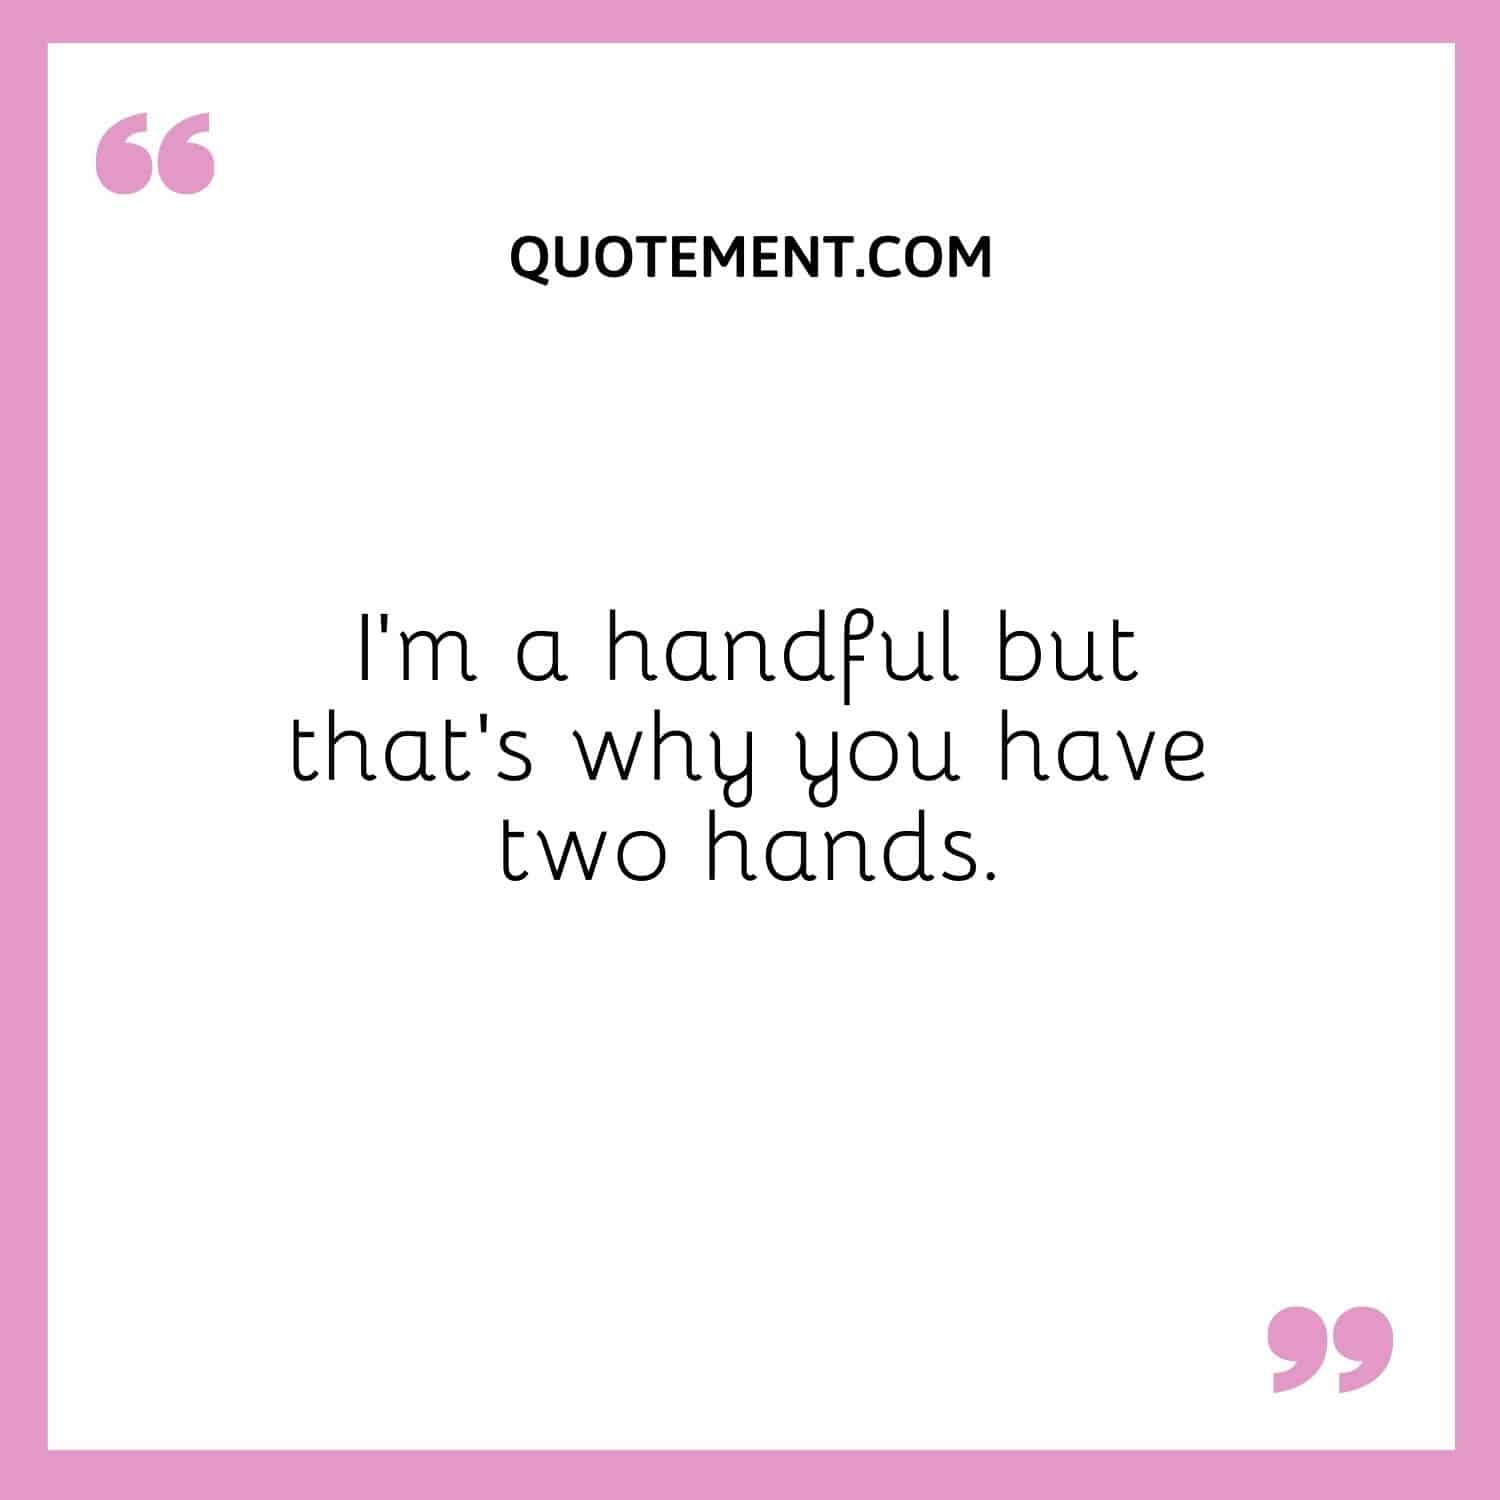 I’m a handful but that’s why you have two hands.